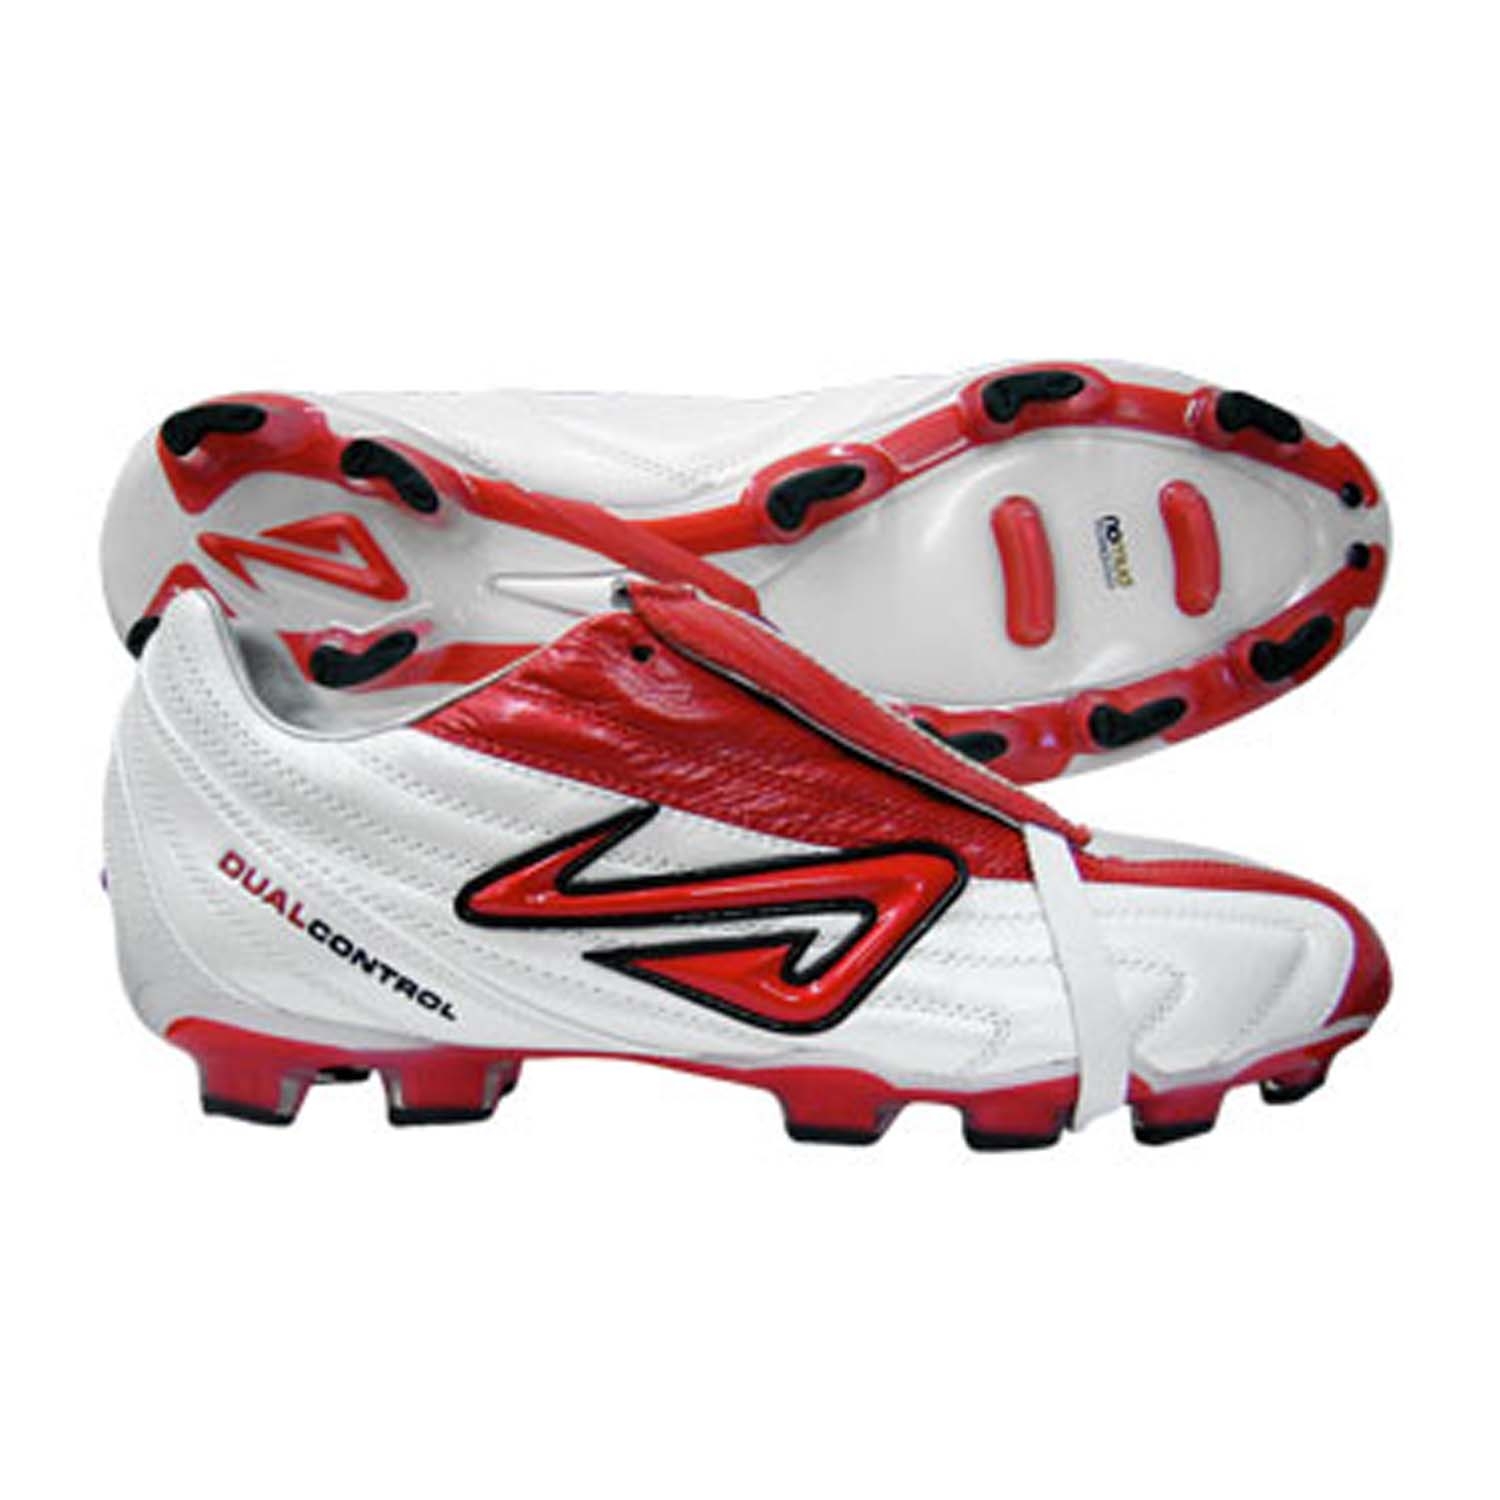 Nomis SNR Nine Pincer FG Football Boots: White/Red | Mike Pawley Sports